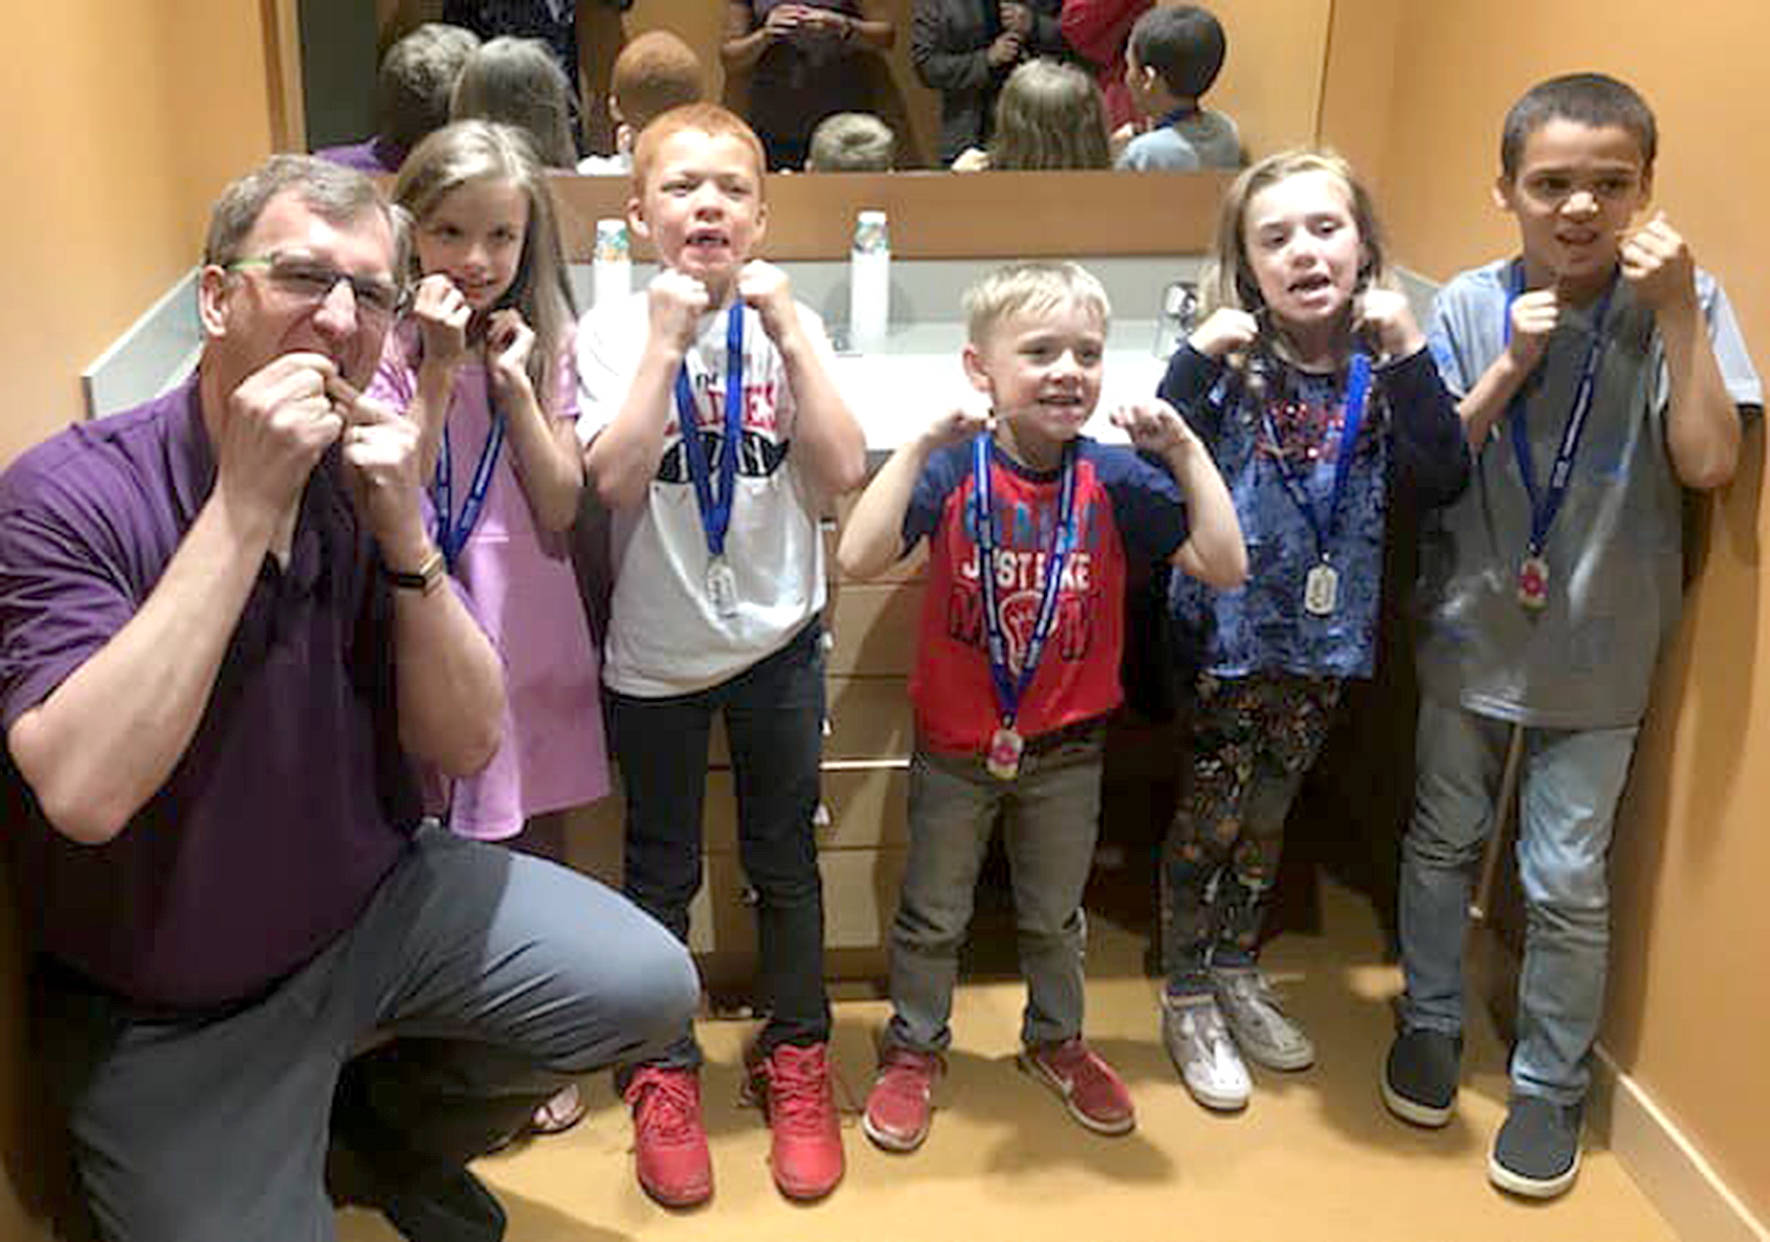 A local Covington dentist teaches kids how to floss their teeth to earn a “brag badge” in the Covington Play Unplugged challenge. Photo courtesy of the Covington Chamber of Commerce.